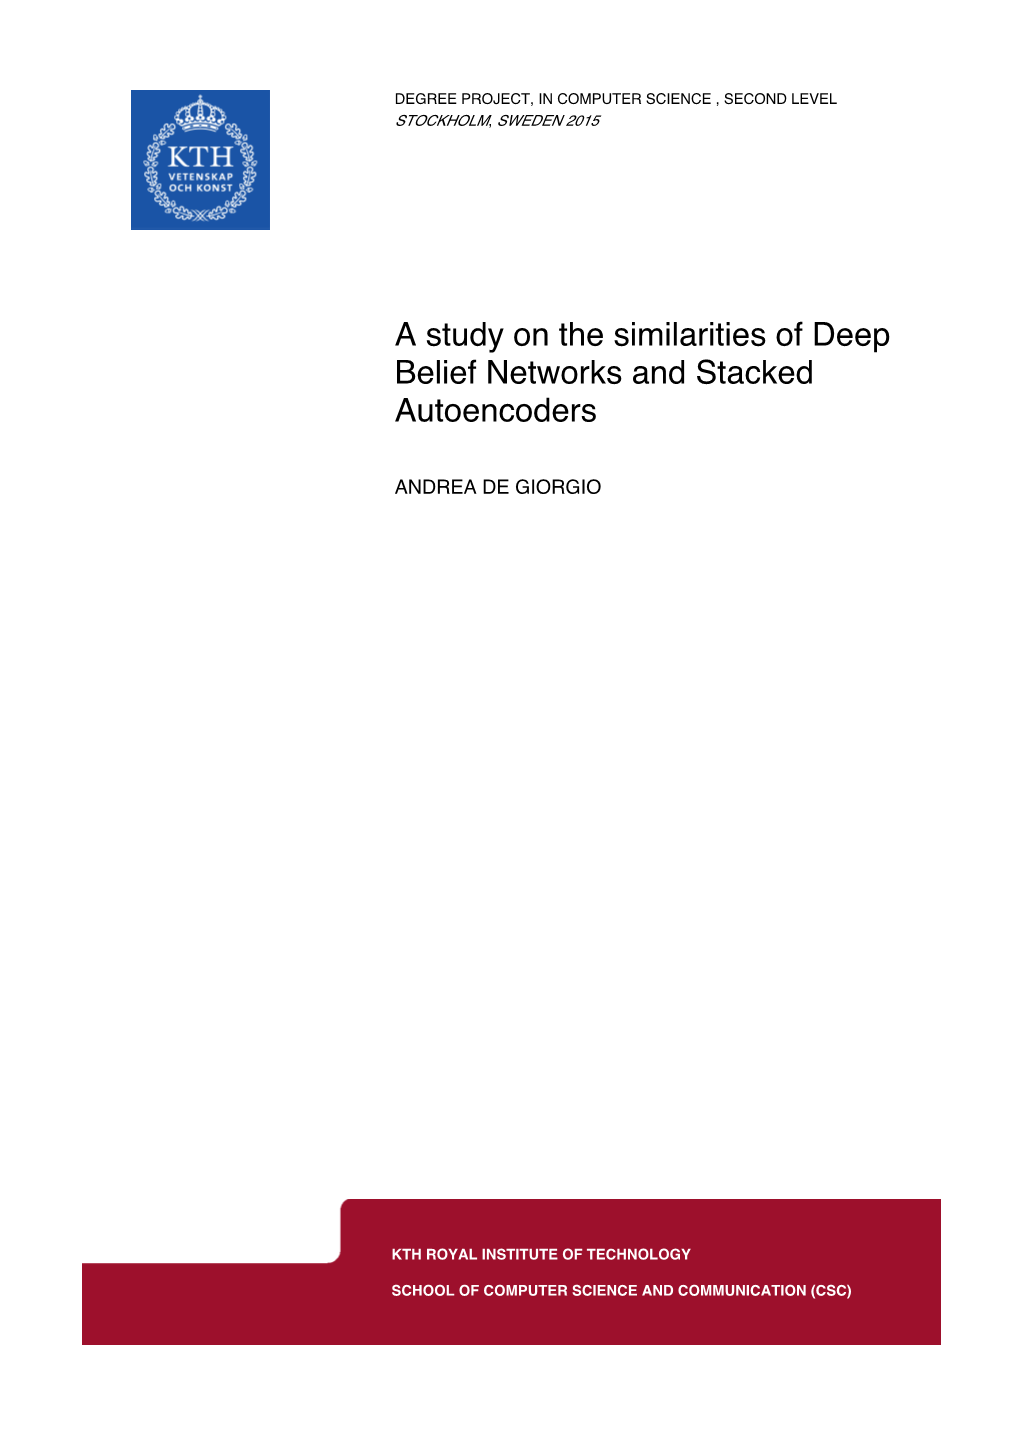 A Study on the Similarities of Deep Belief Networks and Stacked Autoencoders